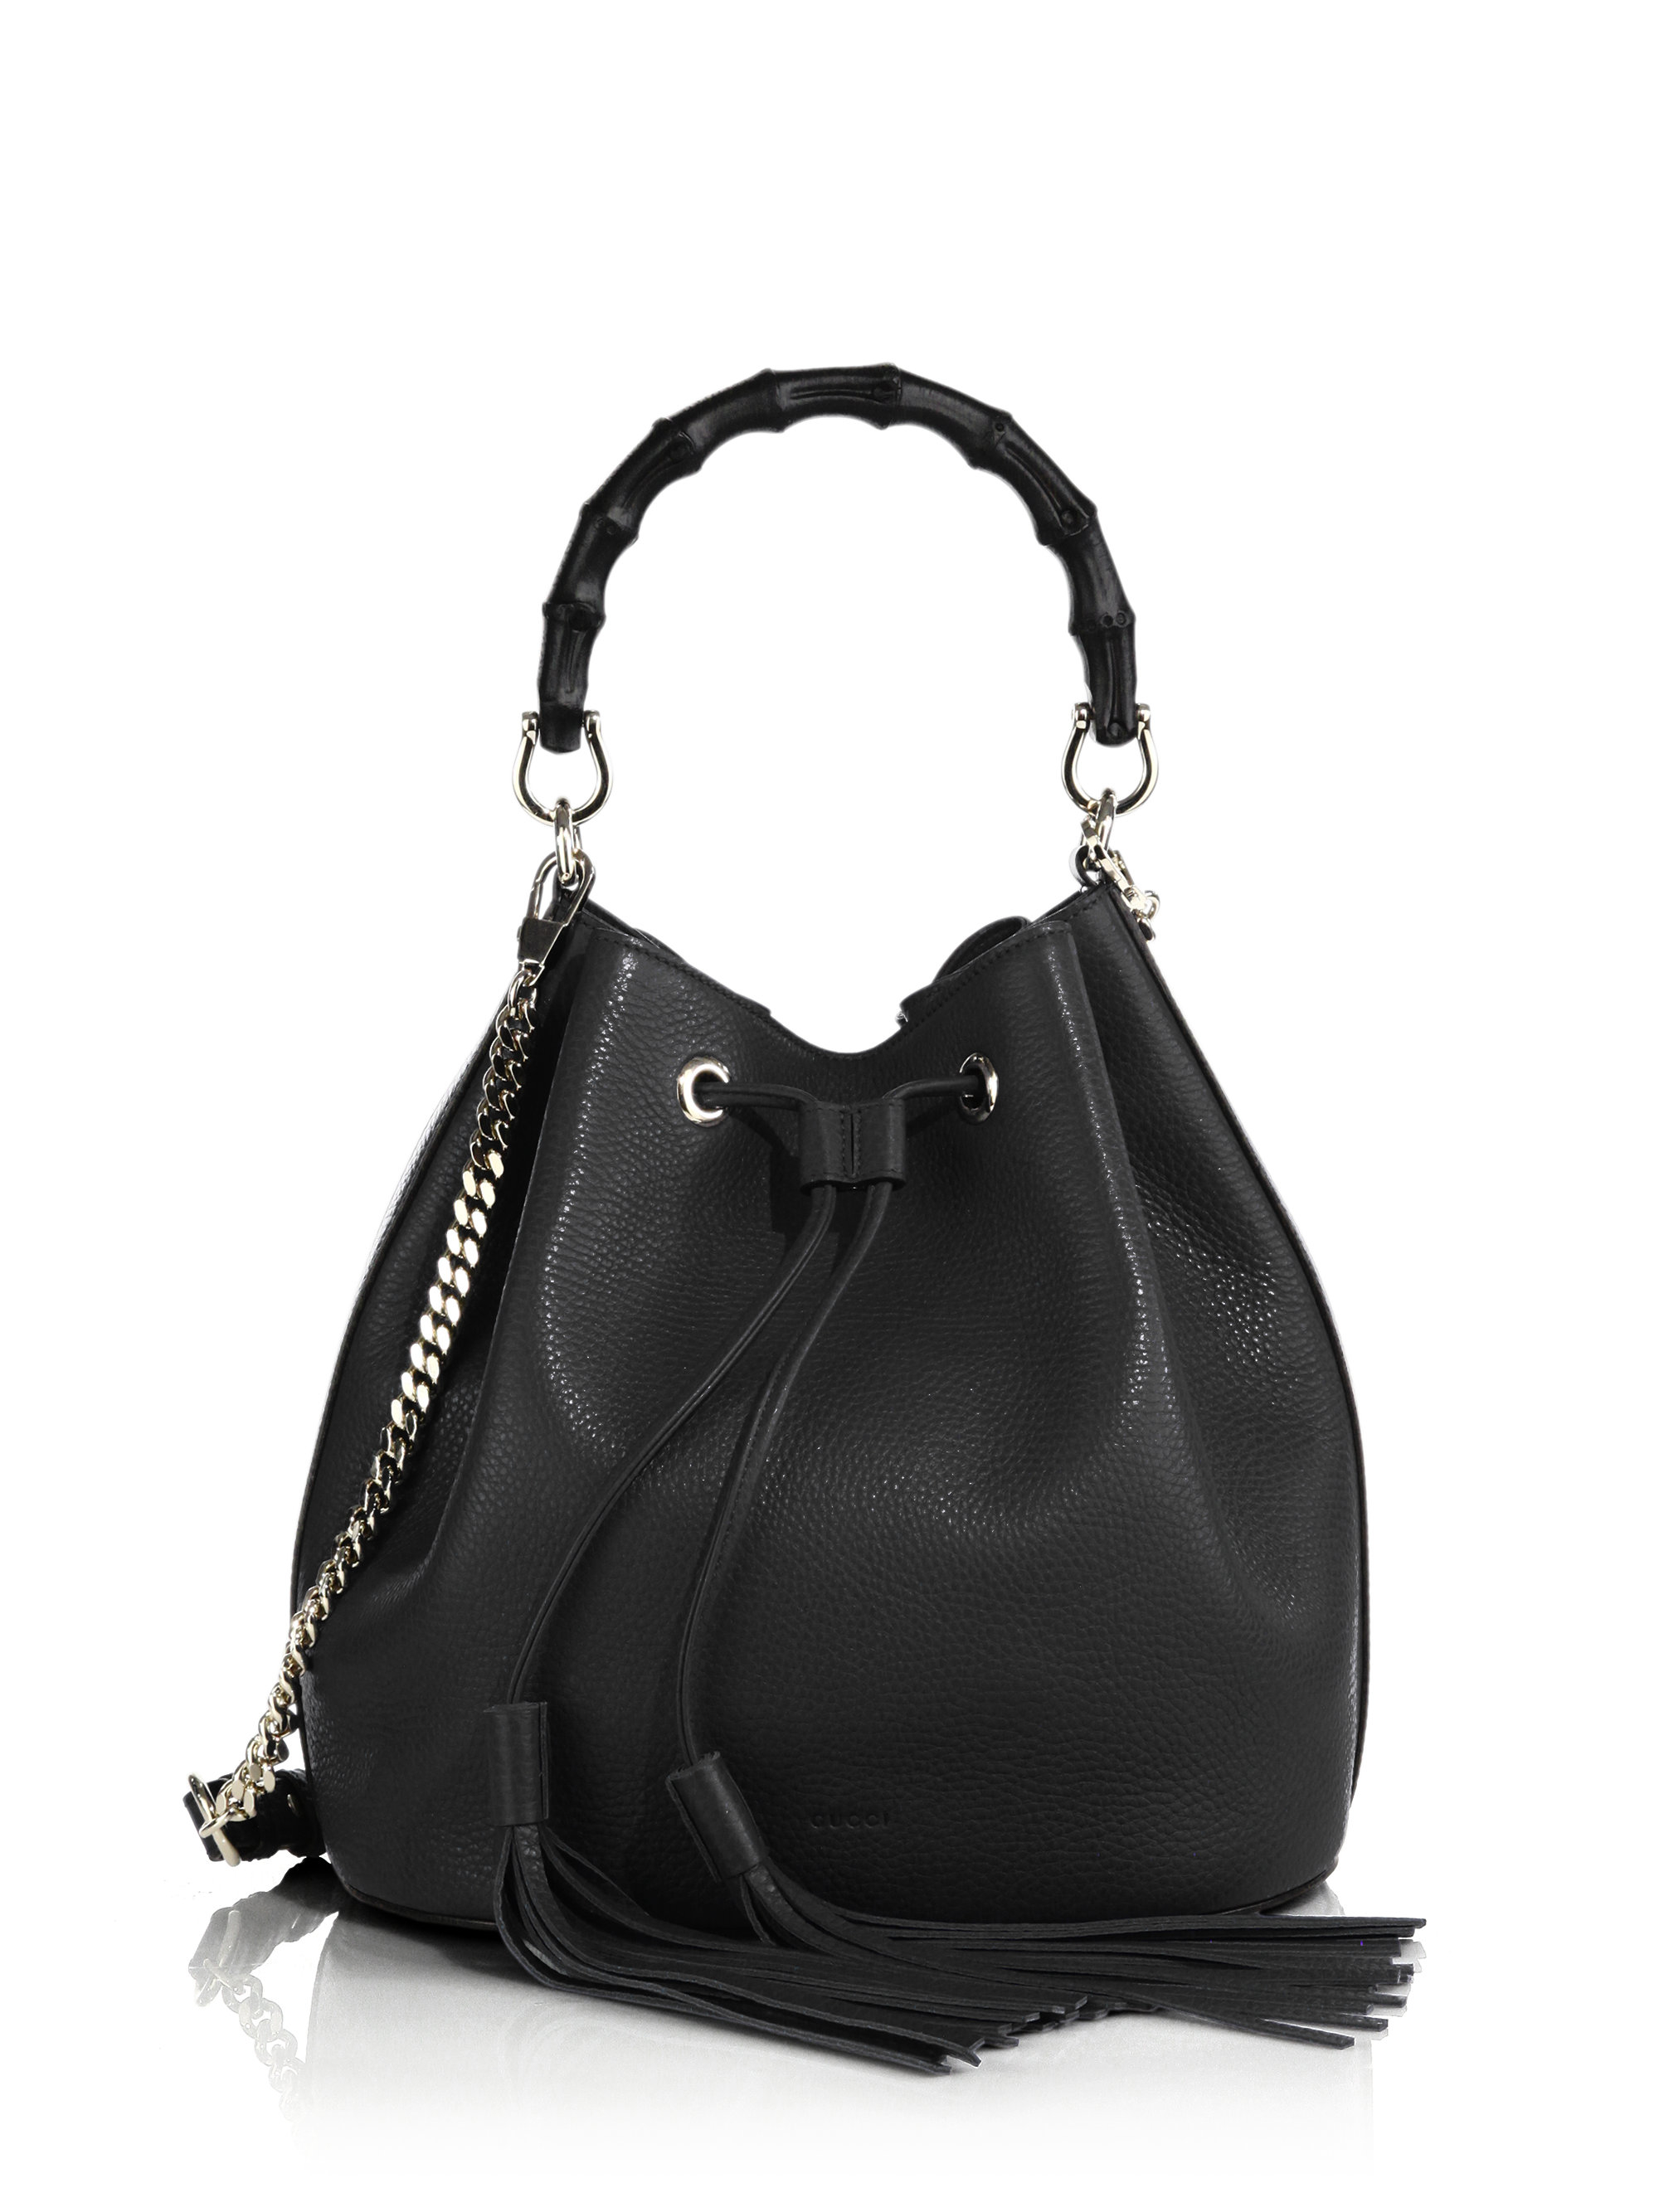 Gucci Miss Bamboo Leather Bucket Bag in Black | Lyst